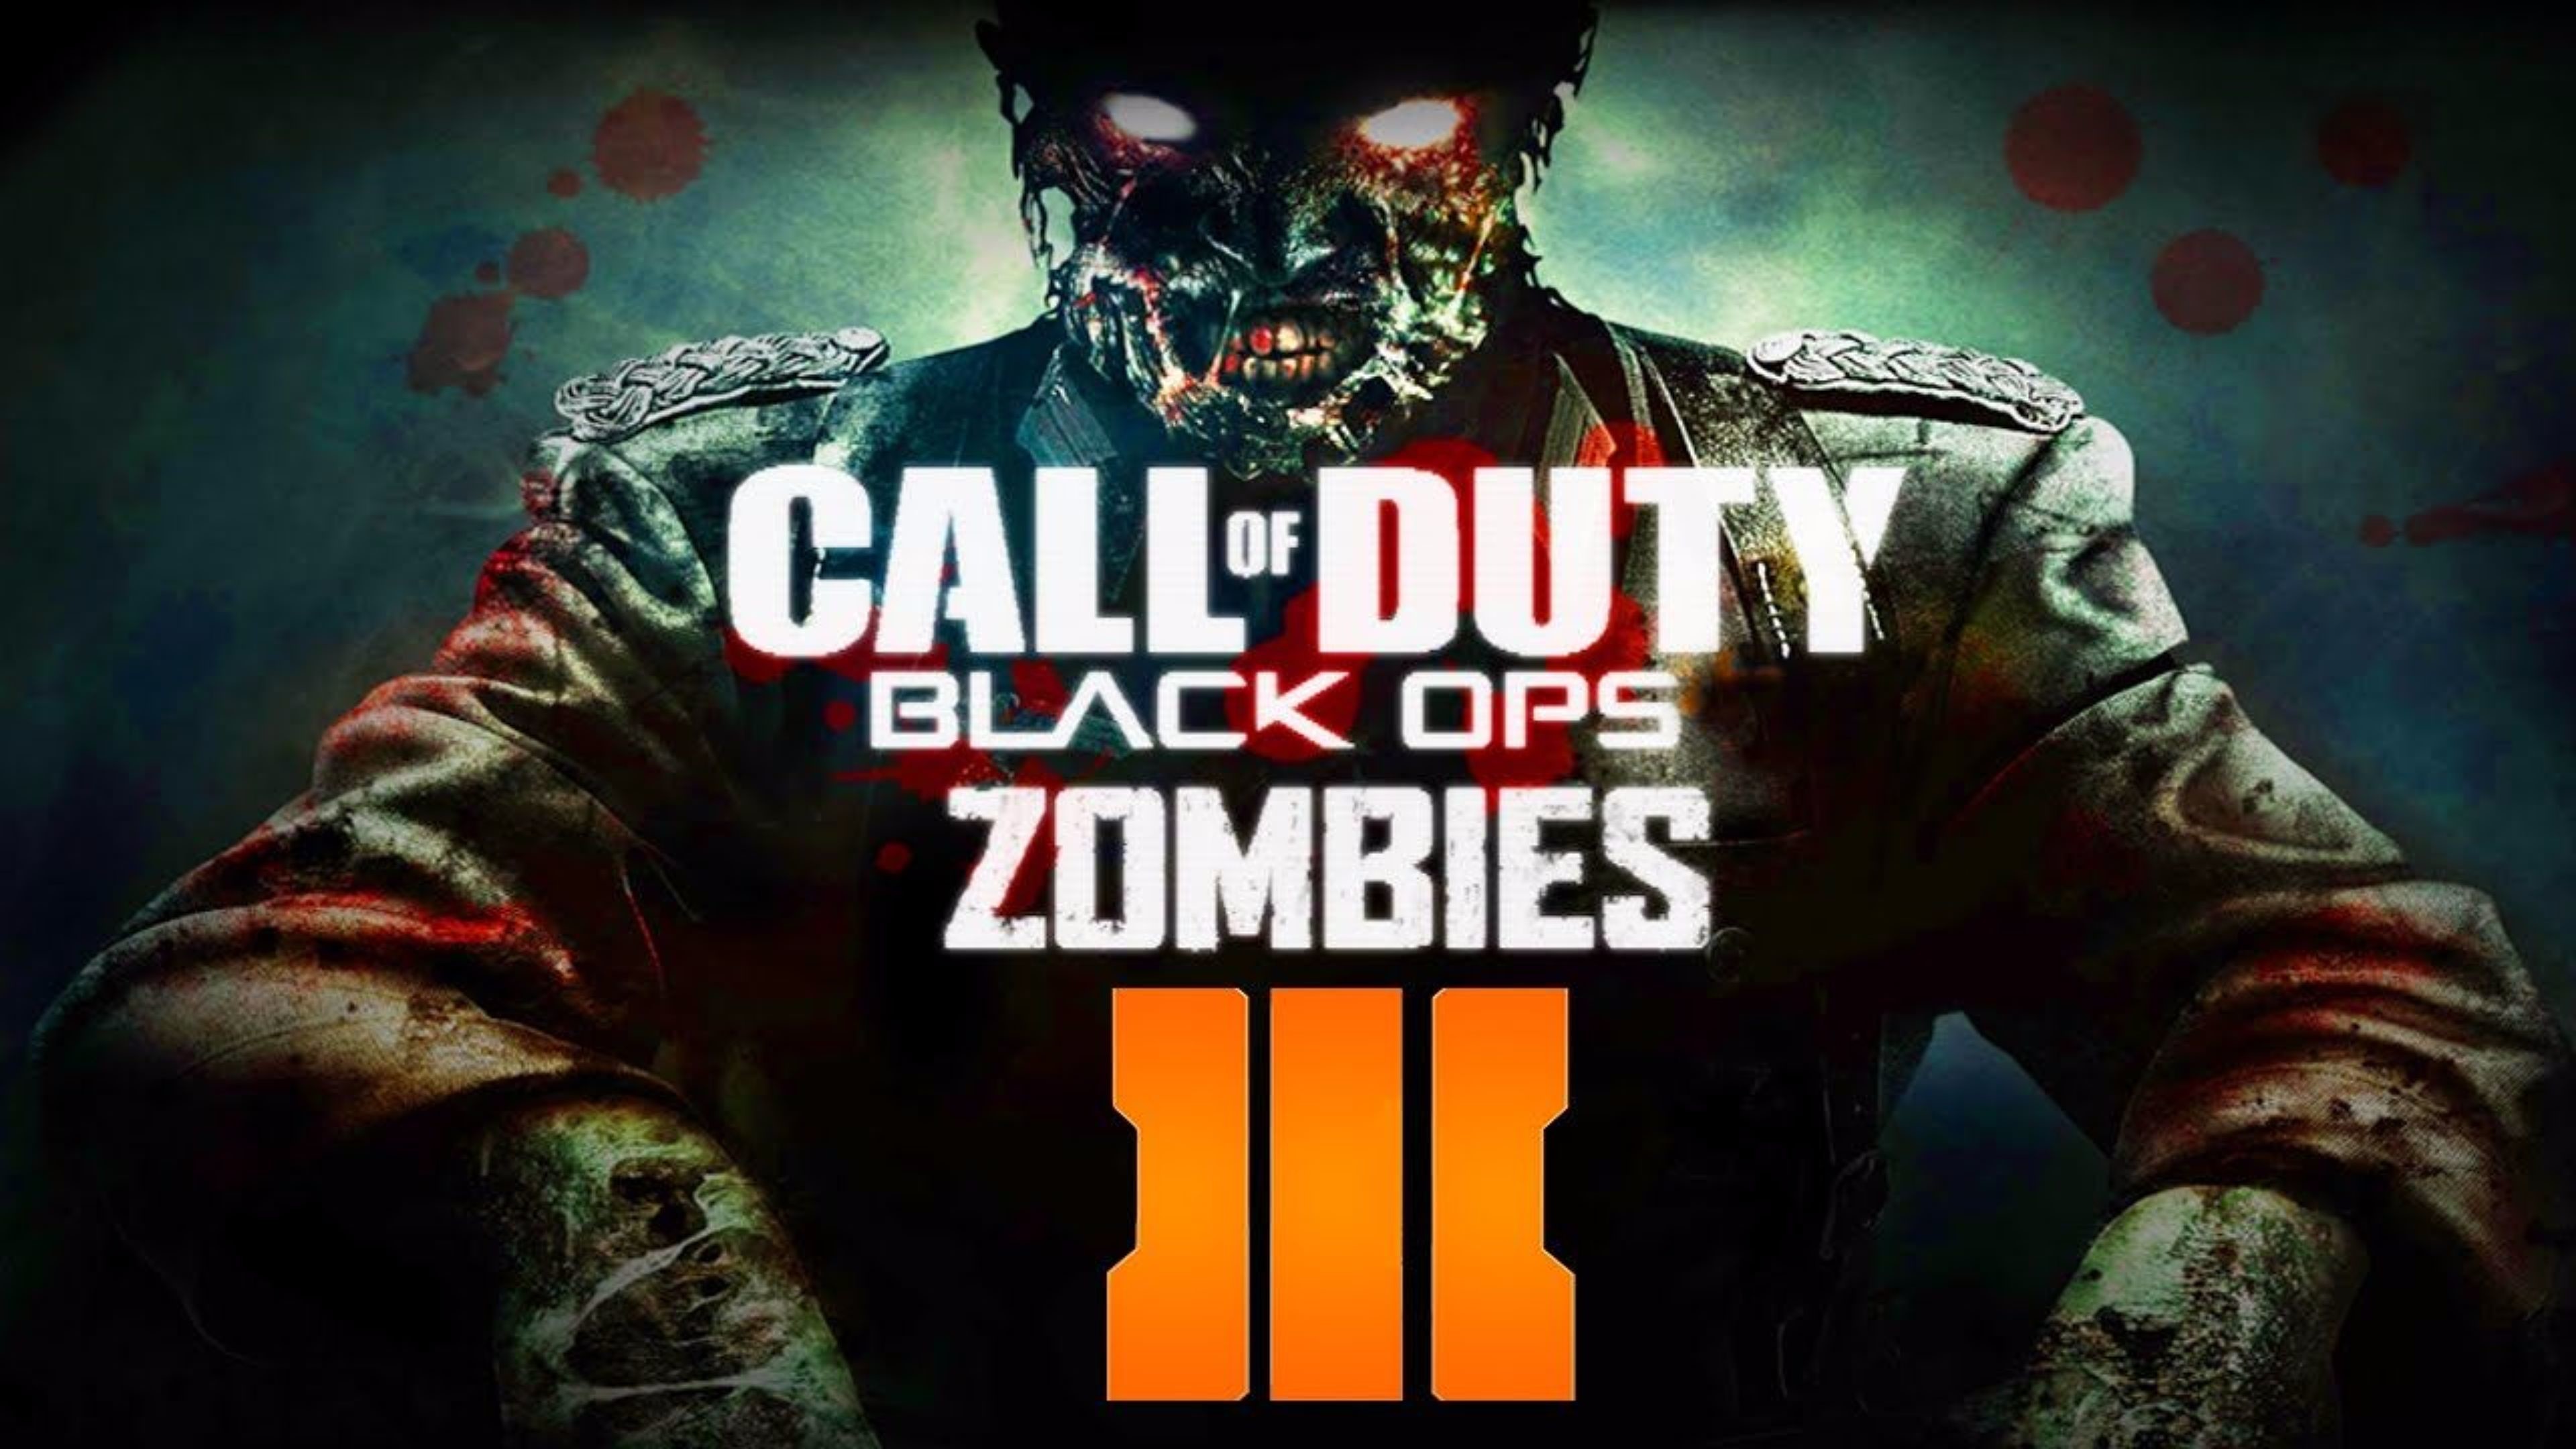 3840x2160 Zombies Call of Duty Black Ops 3 4K Wallpaper